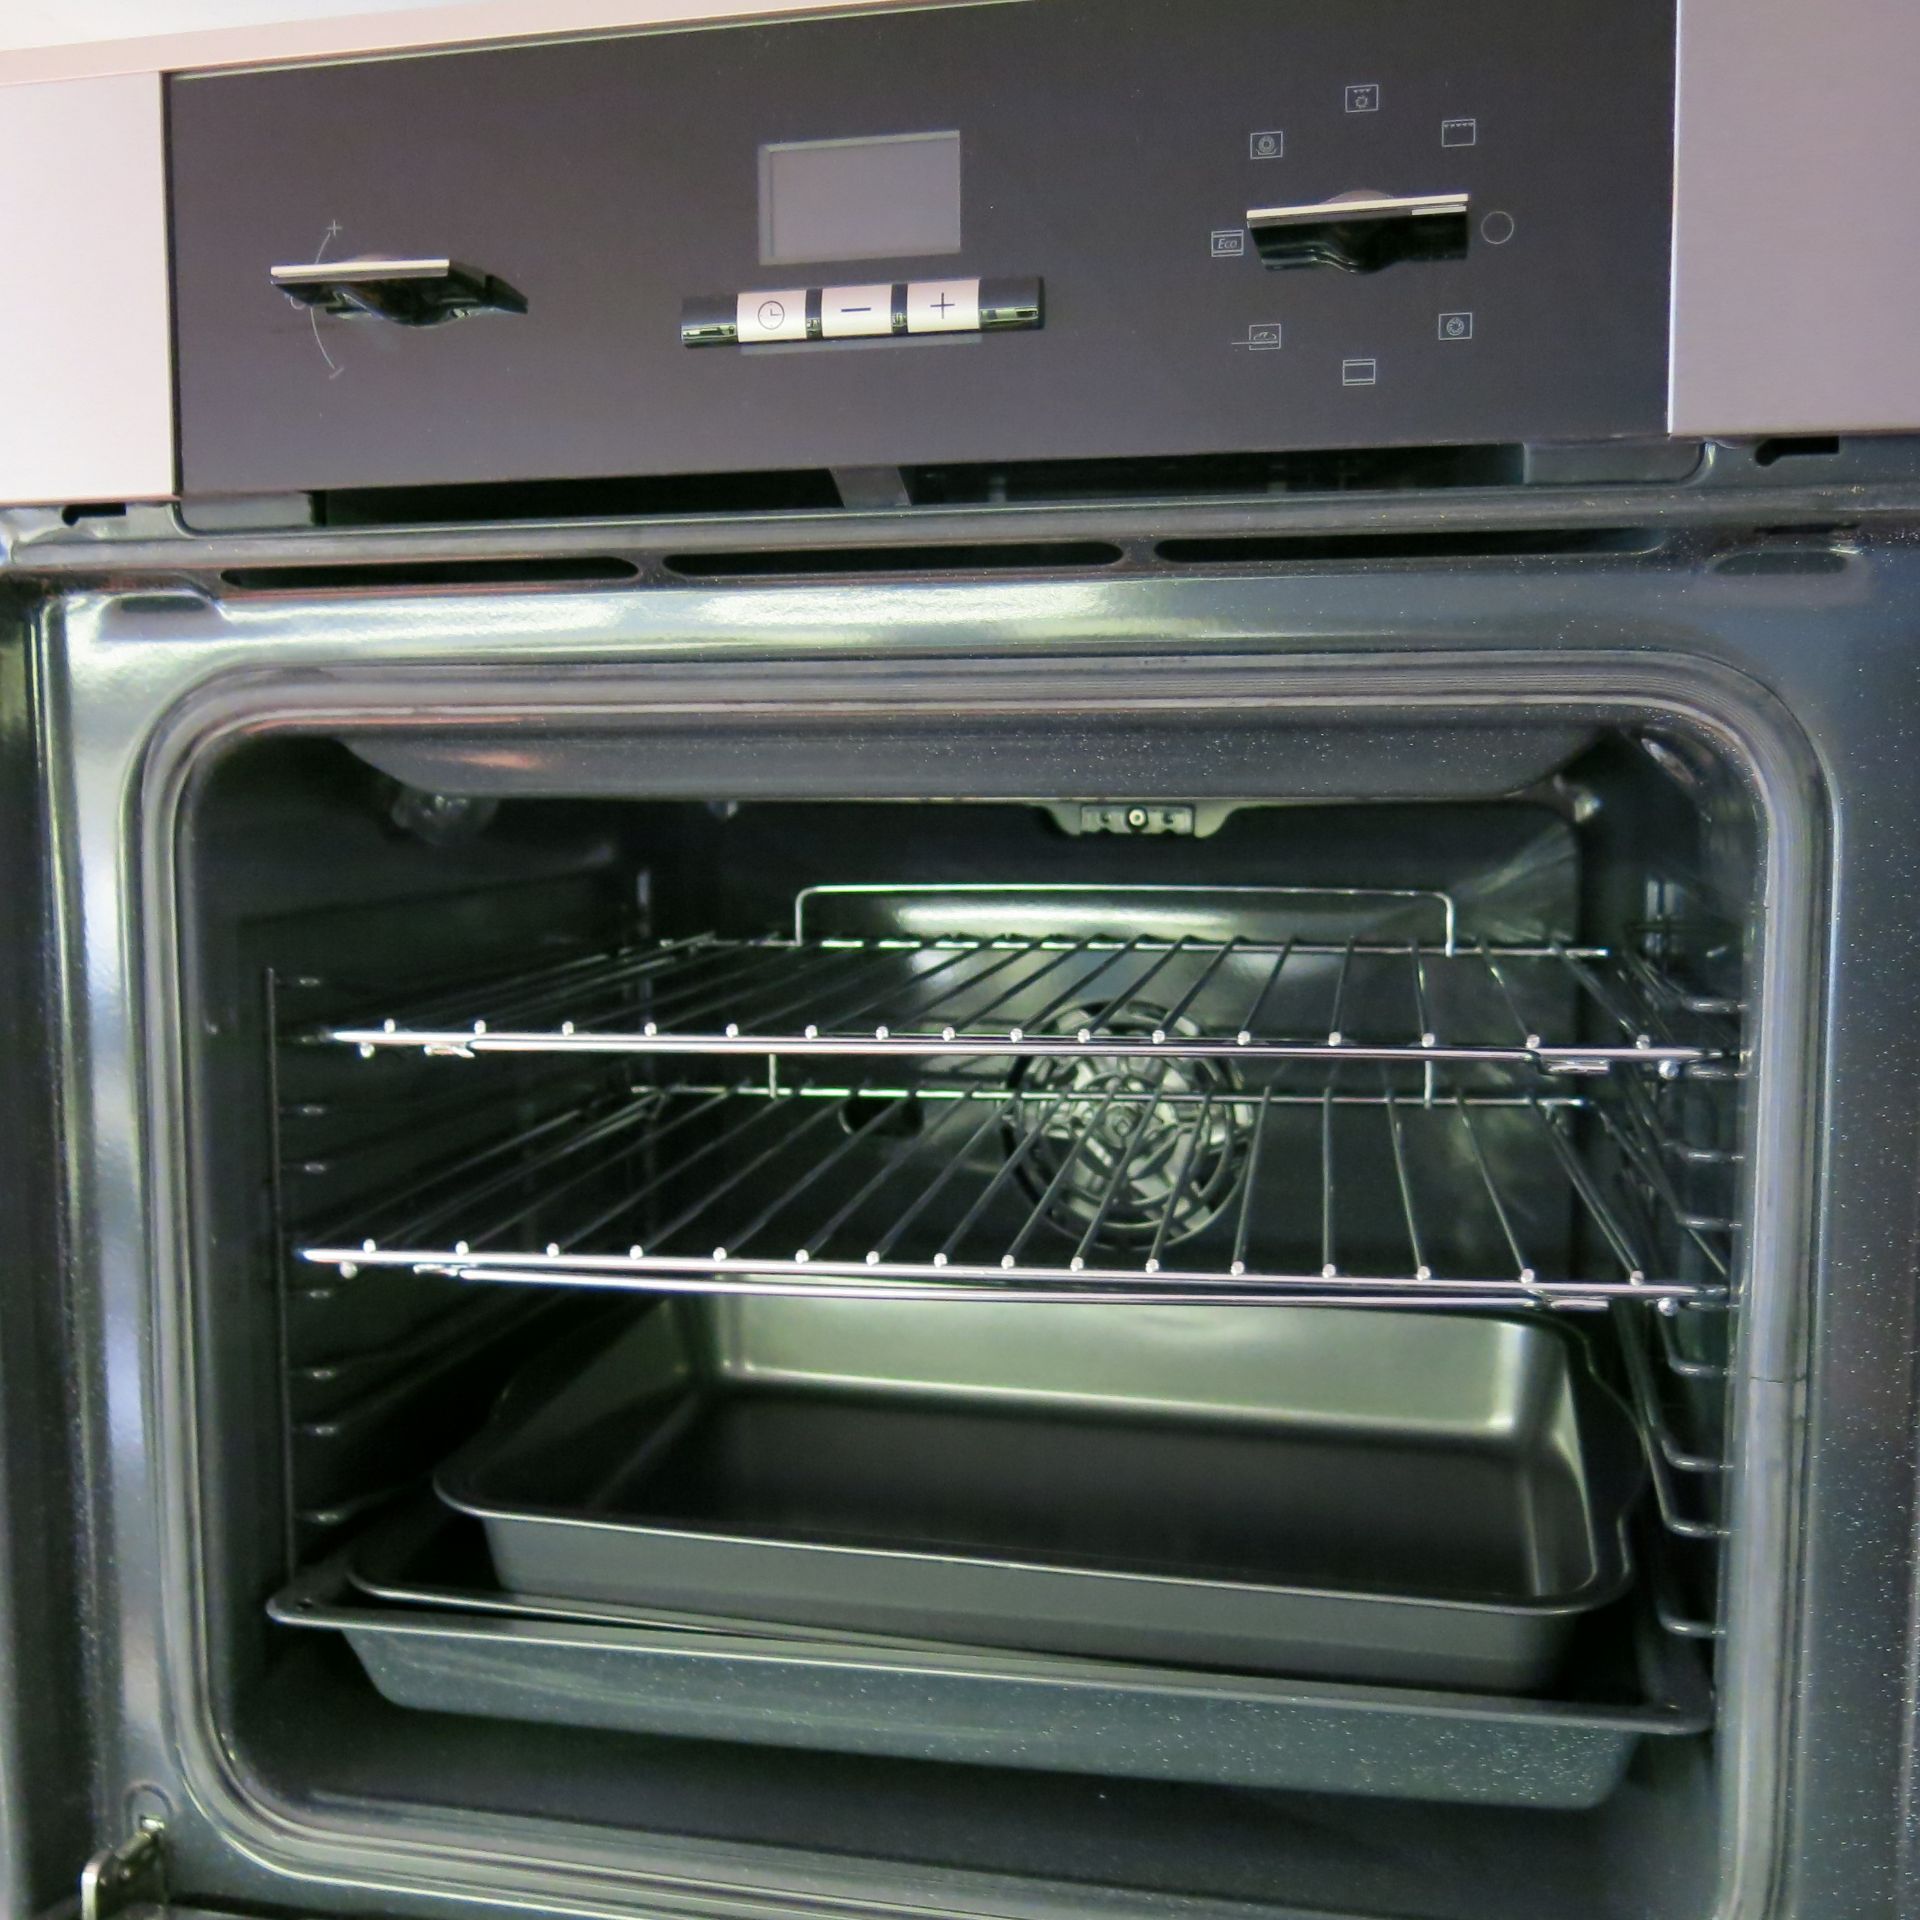 De Dietrich Integrated Stainless Steel Electric Single Oven, Model DOE705X. Ex Display with - Image 3 of 4